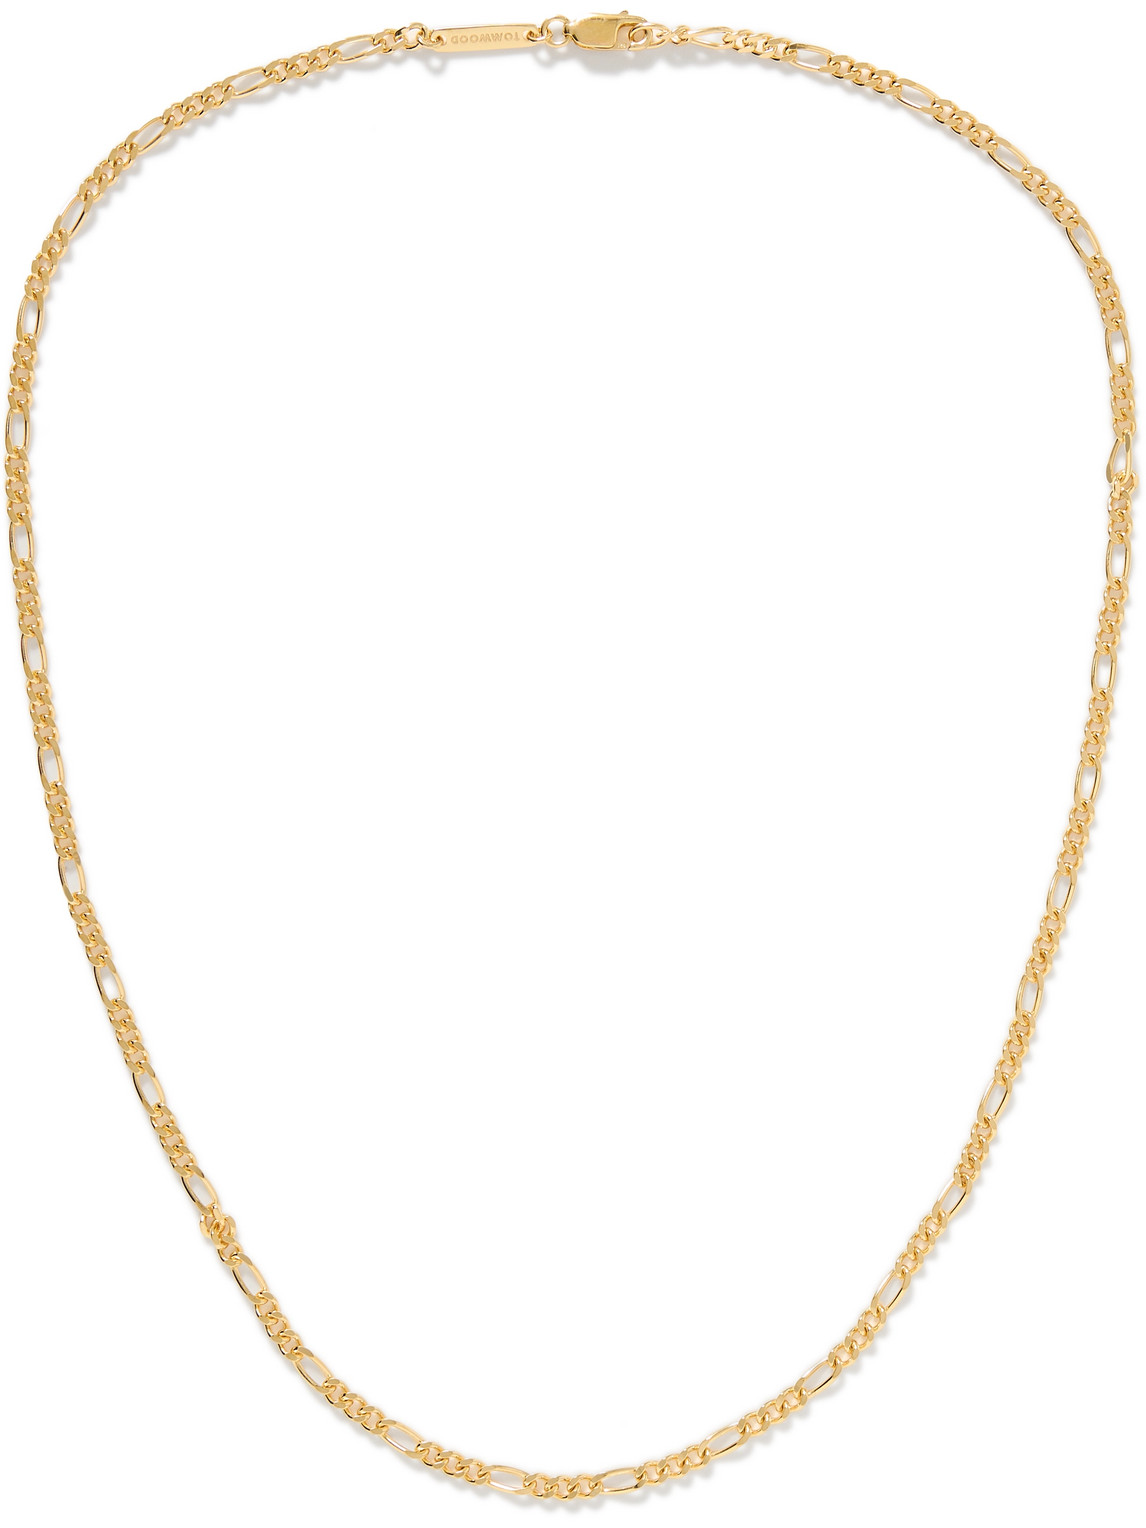 Bo Slim Recycled Gold-Plated Chain Necklace